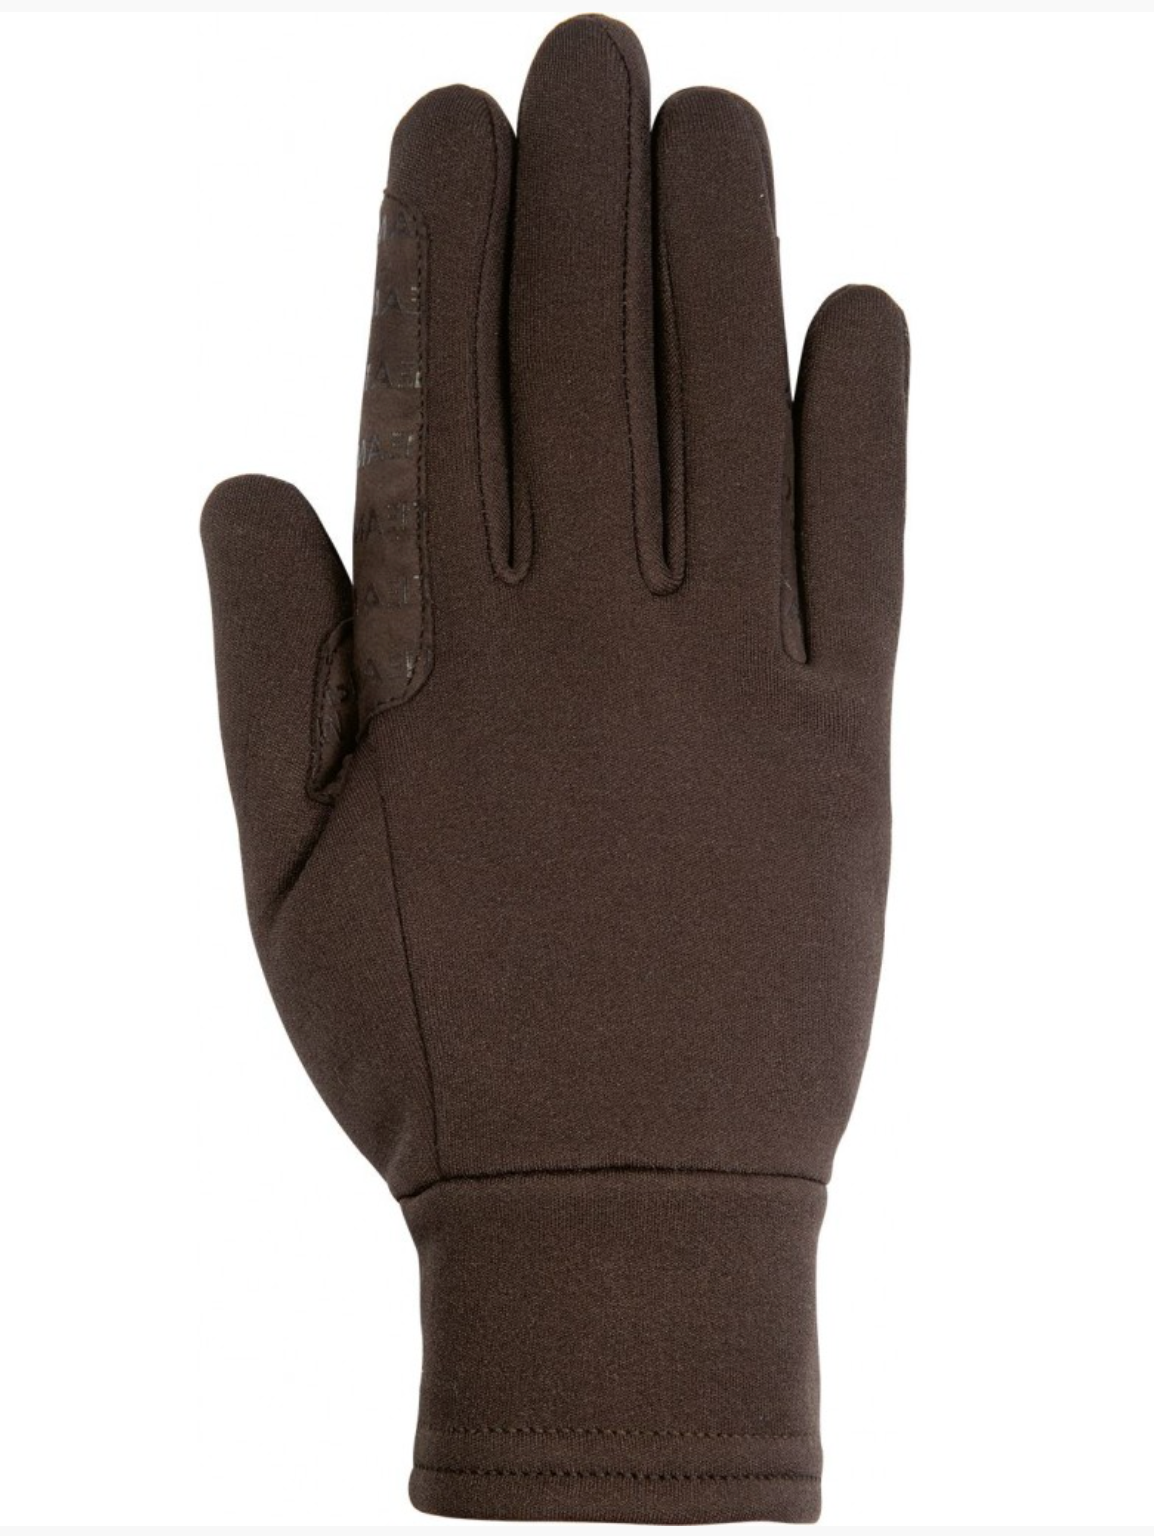 HKM Kids Fleece Riding Gloves  HKM - Equestrian Fashion Outfitters